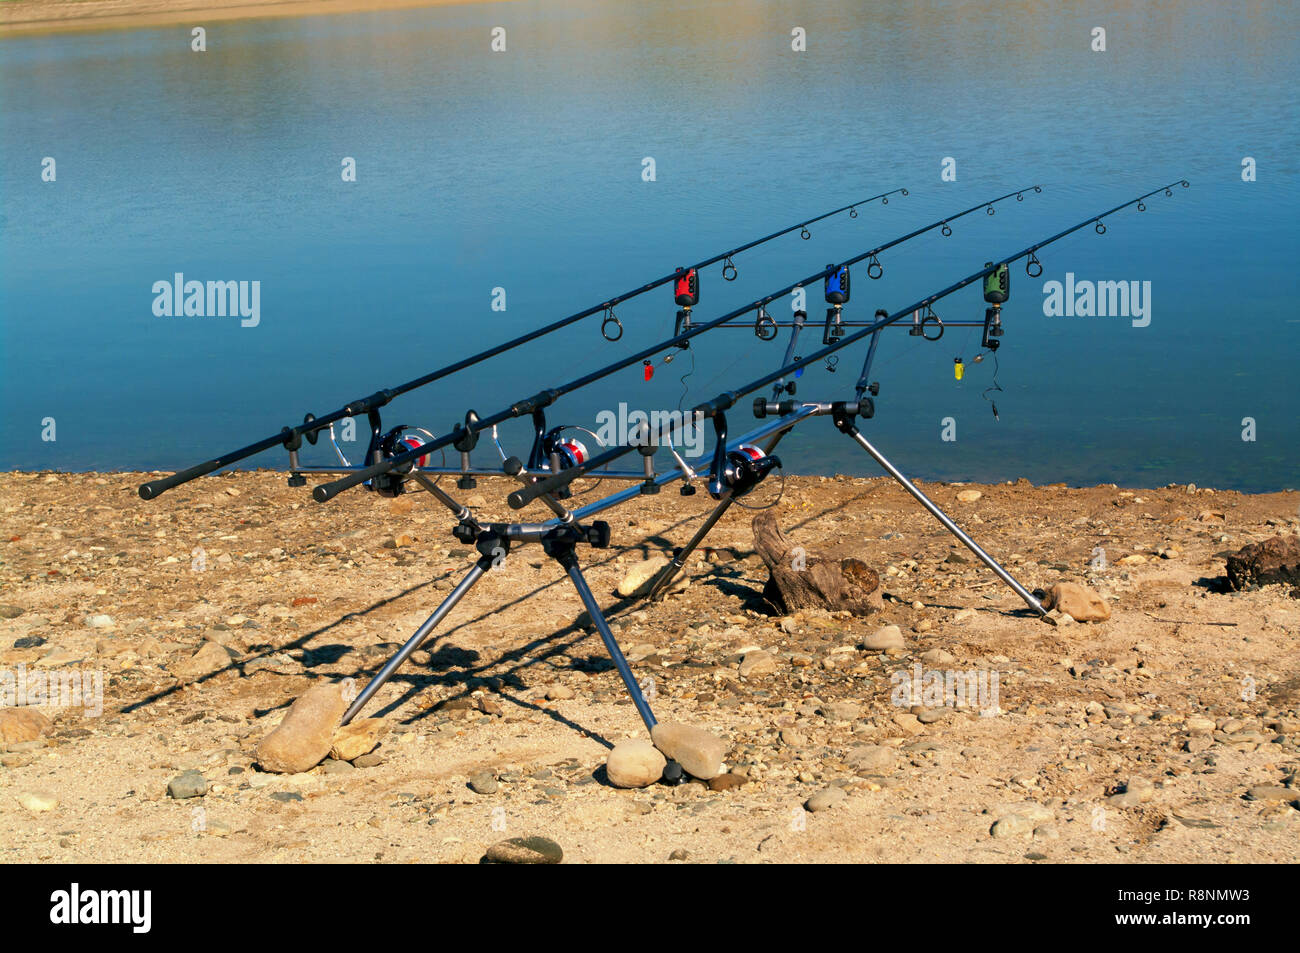 Carp fishing. Rods on a rod pod with the swingers attached ready to catch some fish monster. Stock Photo